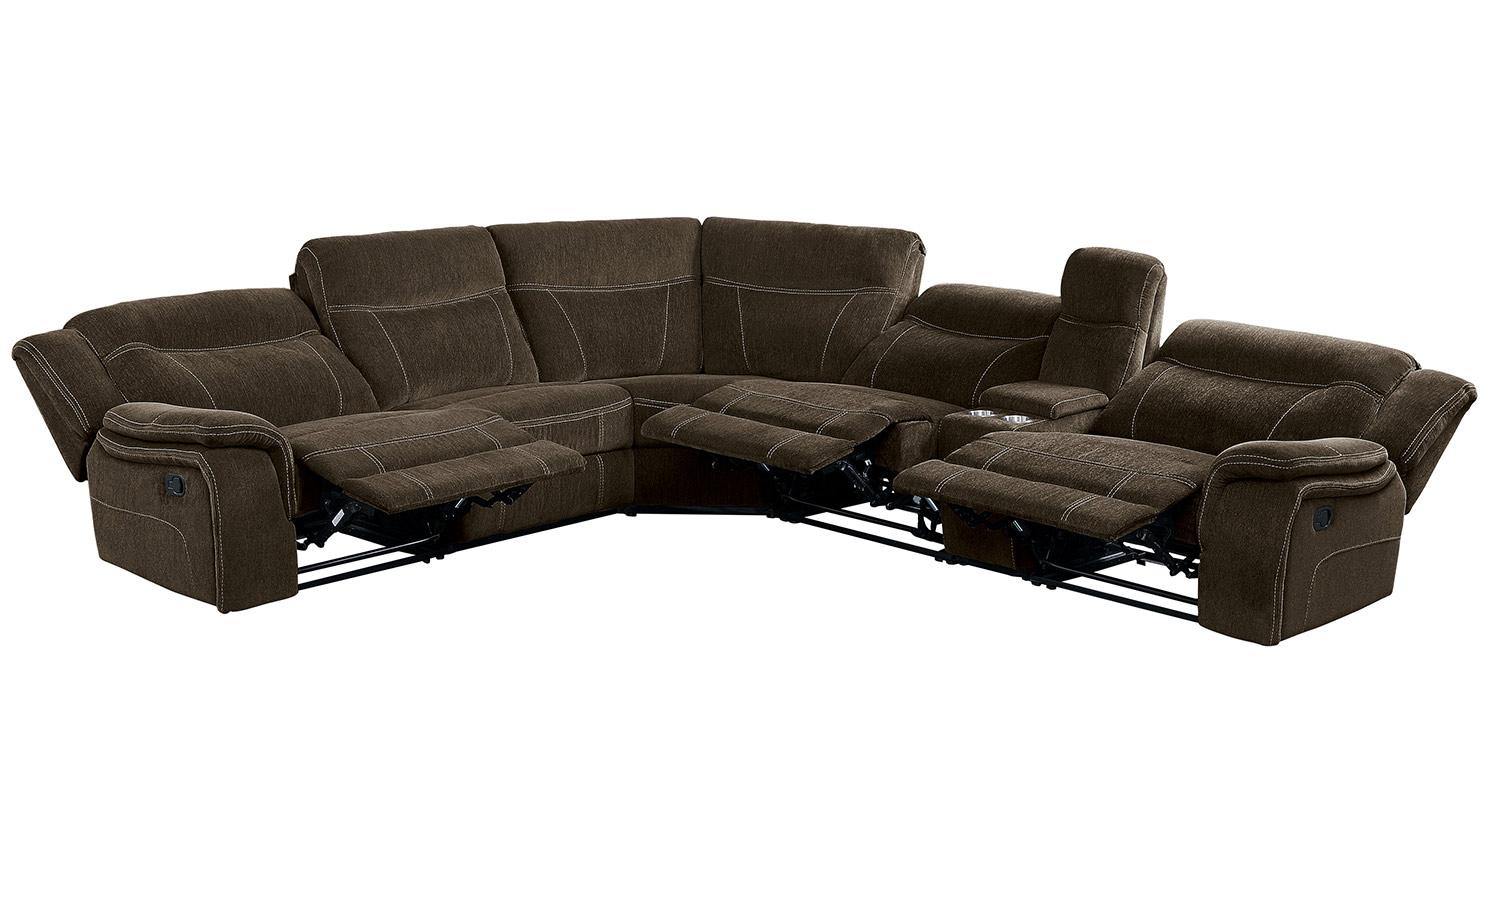 Homelegance Annabelle Reclining Sectional Sofa Set - Brown